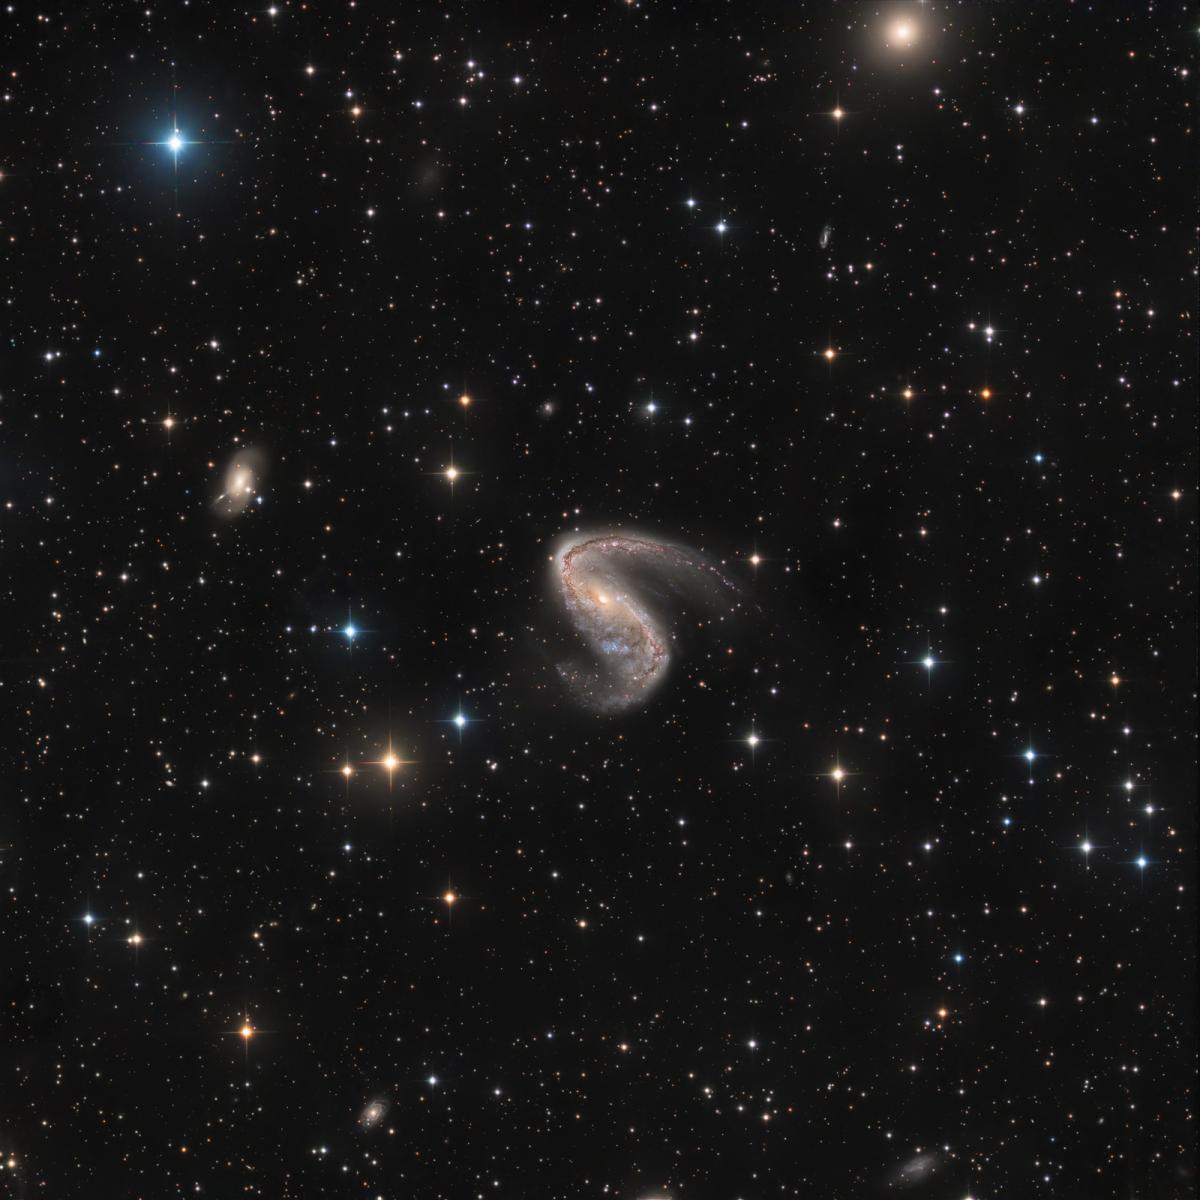 Image of a curved spiral of a galaxy